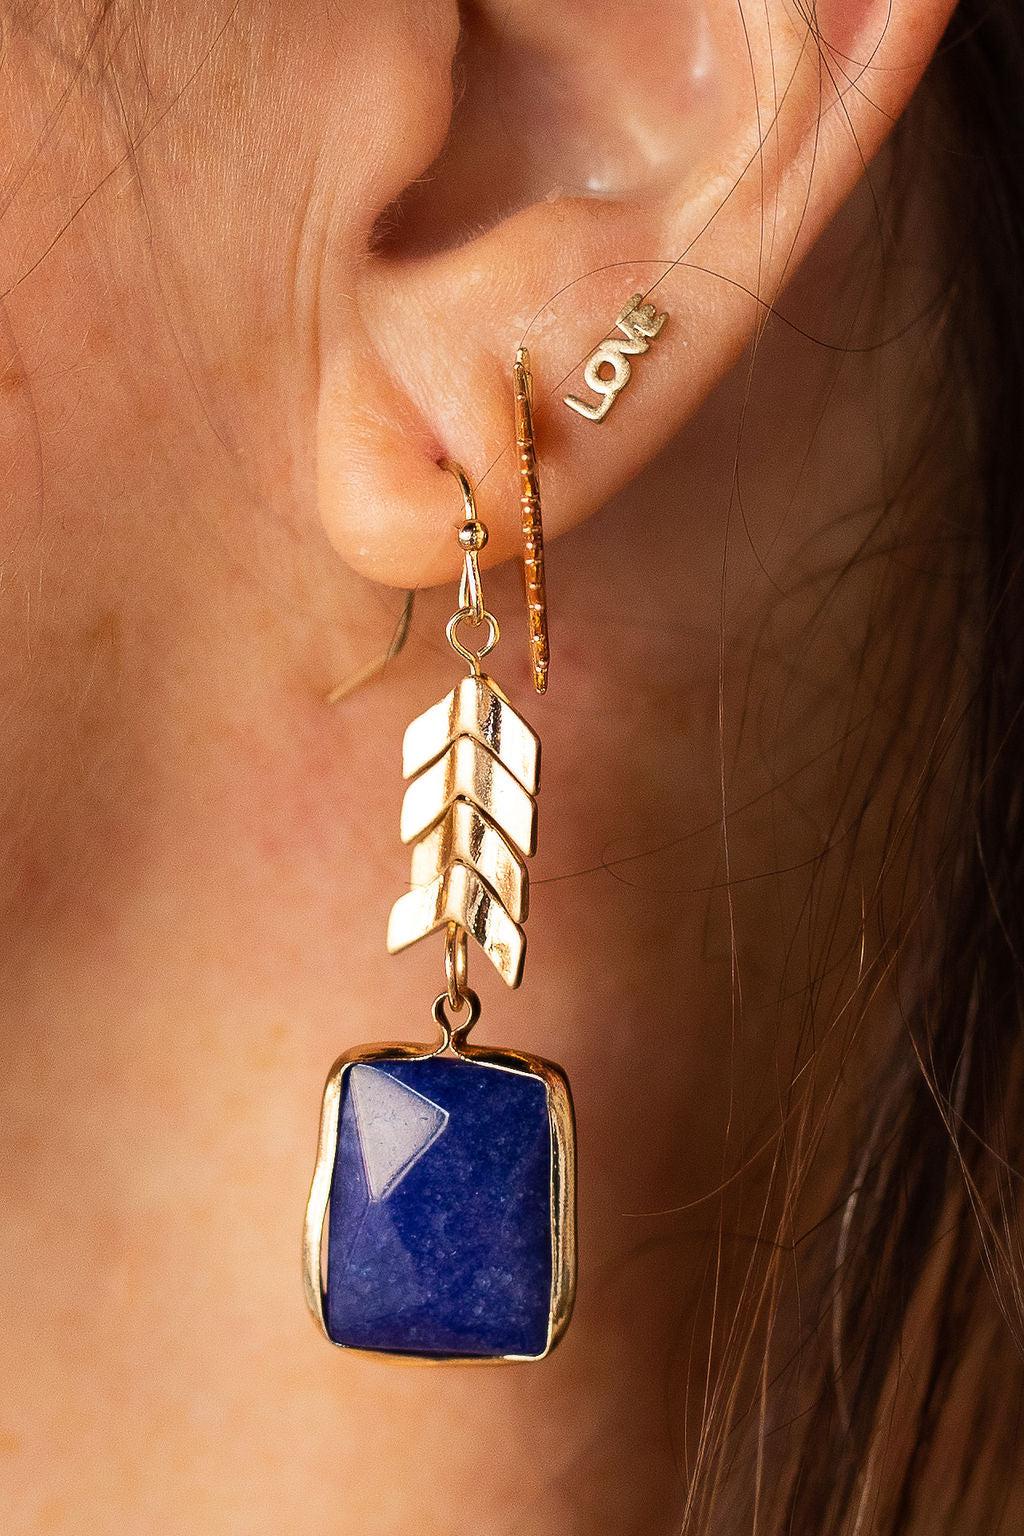 Lapis Dangle Earrings-180 Jewelry-Chevron Earrings, Dangle Earrings, Gold Chevron Earrings, Lapis Dangle Earrings, Lapis Earrings, Max Retail-[option4]-[option5]-[option6]-Womens-USA-Clothing-Boutique-Shop-Online-Clothes Minded